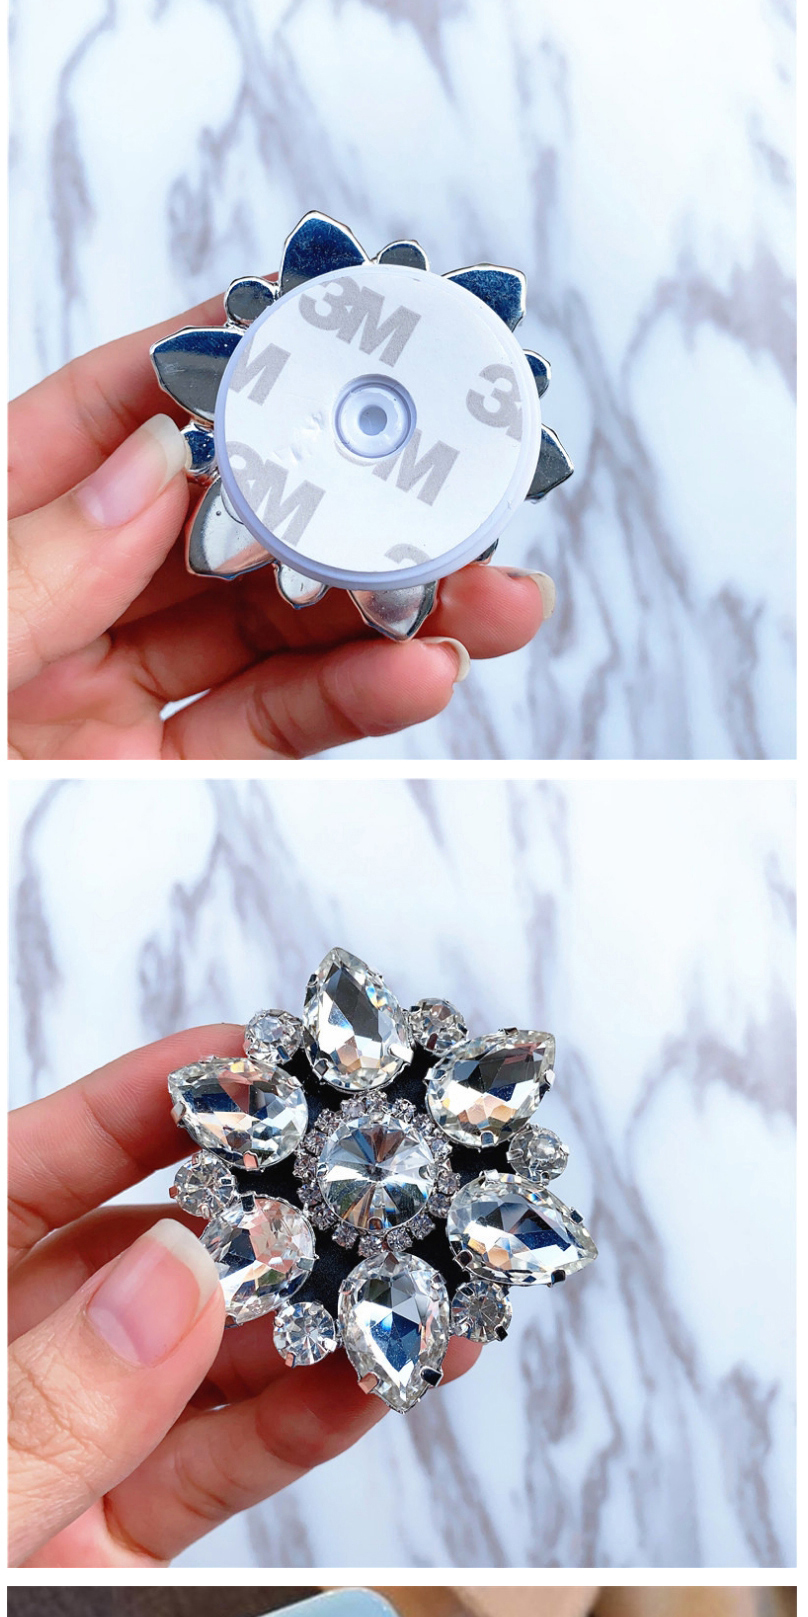 Fashion No. 2 Small Diamond-silver Color Bottom Jeweled Cubic Crystal Stand Ring Clasp,Phone Hlder